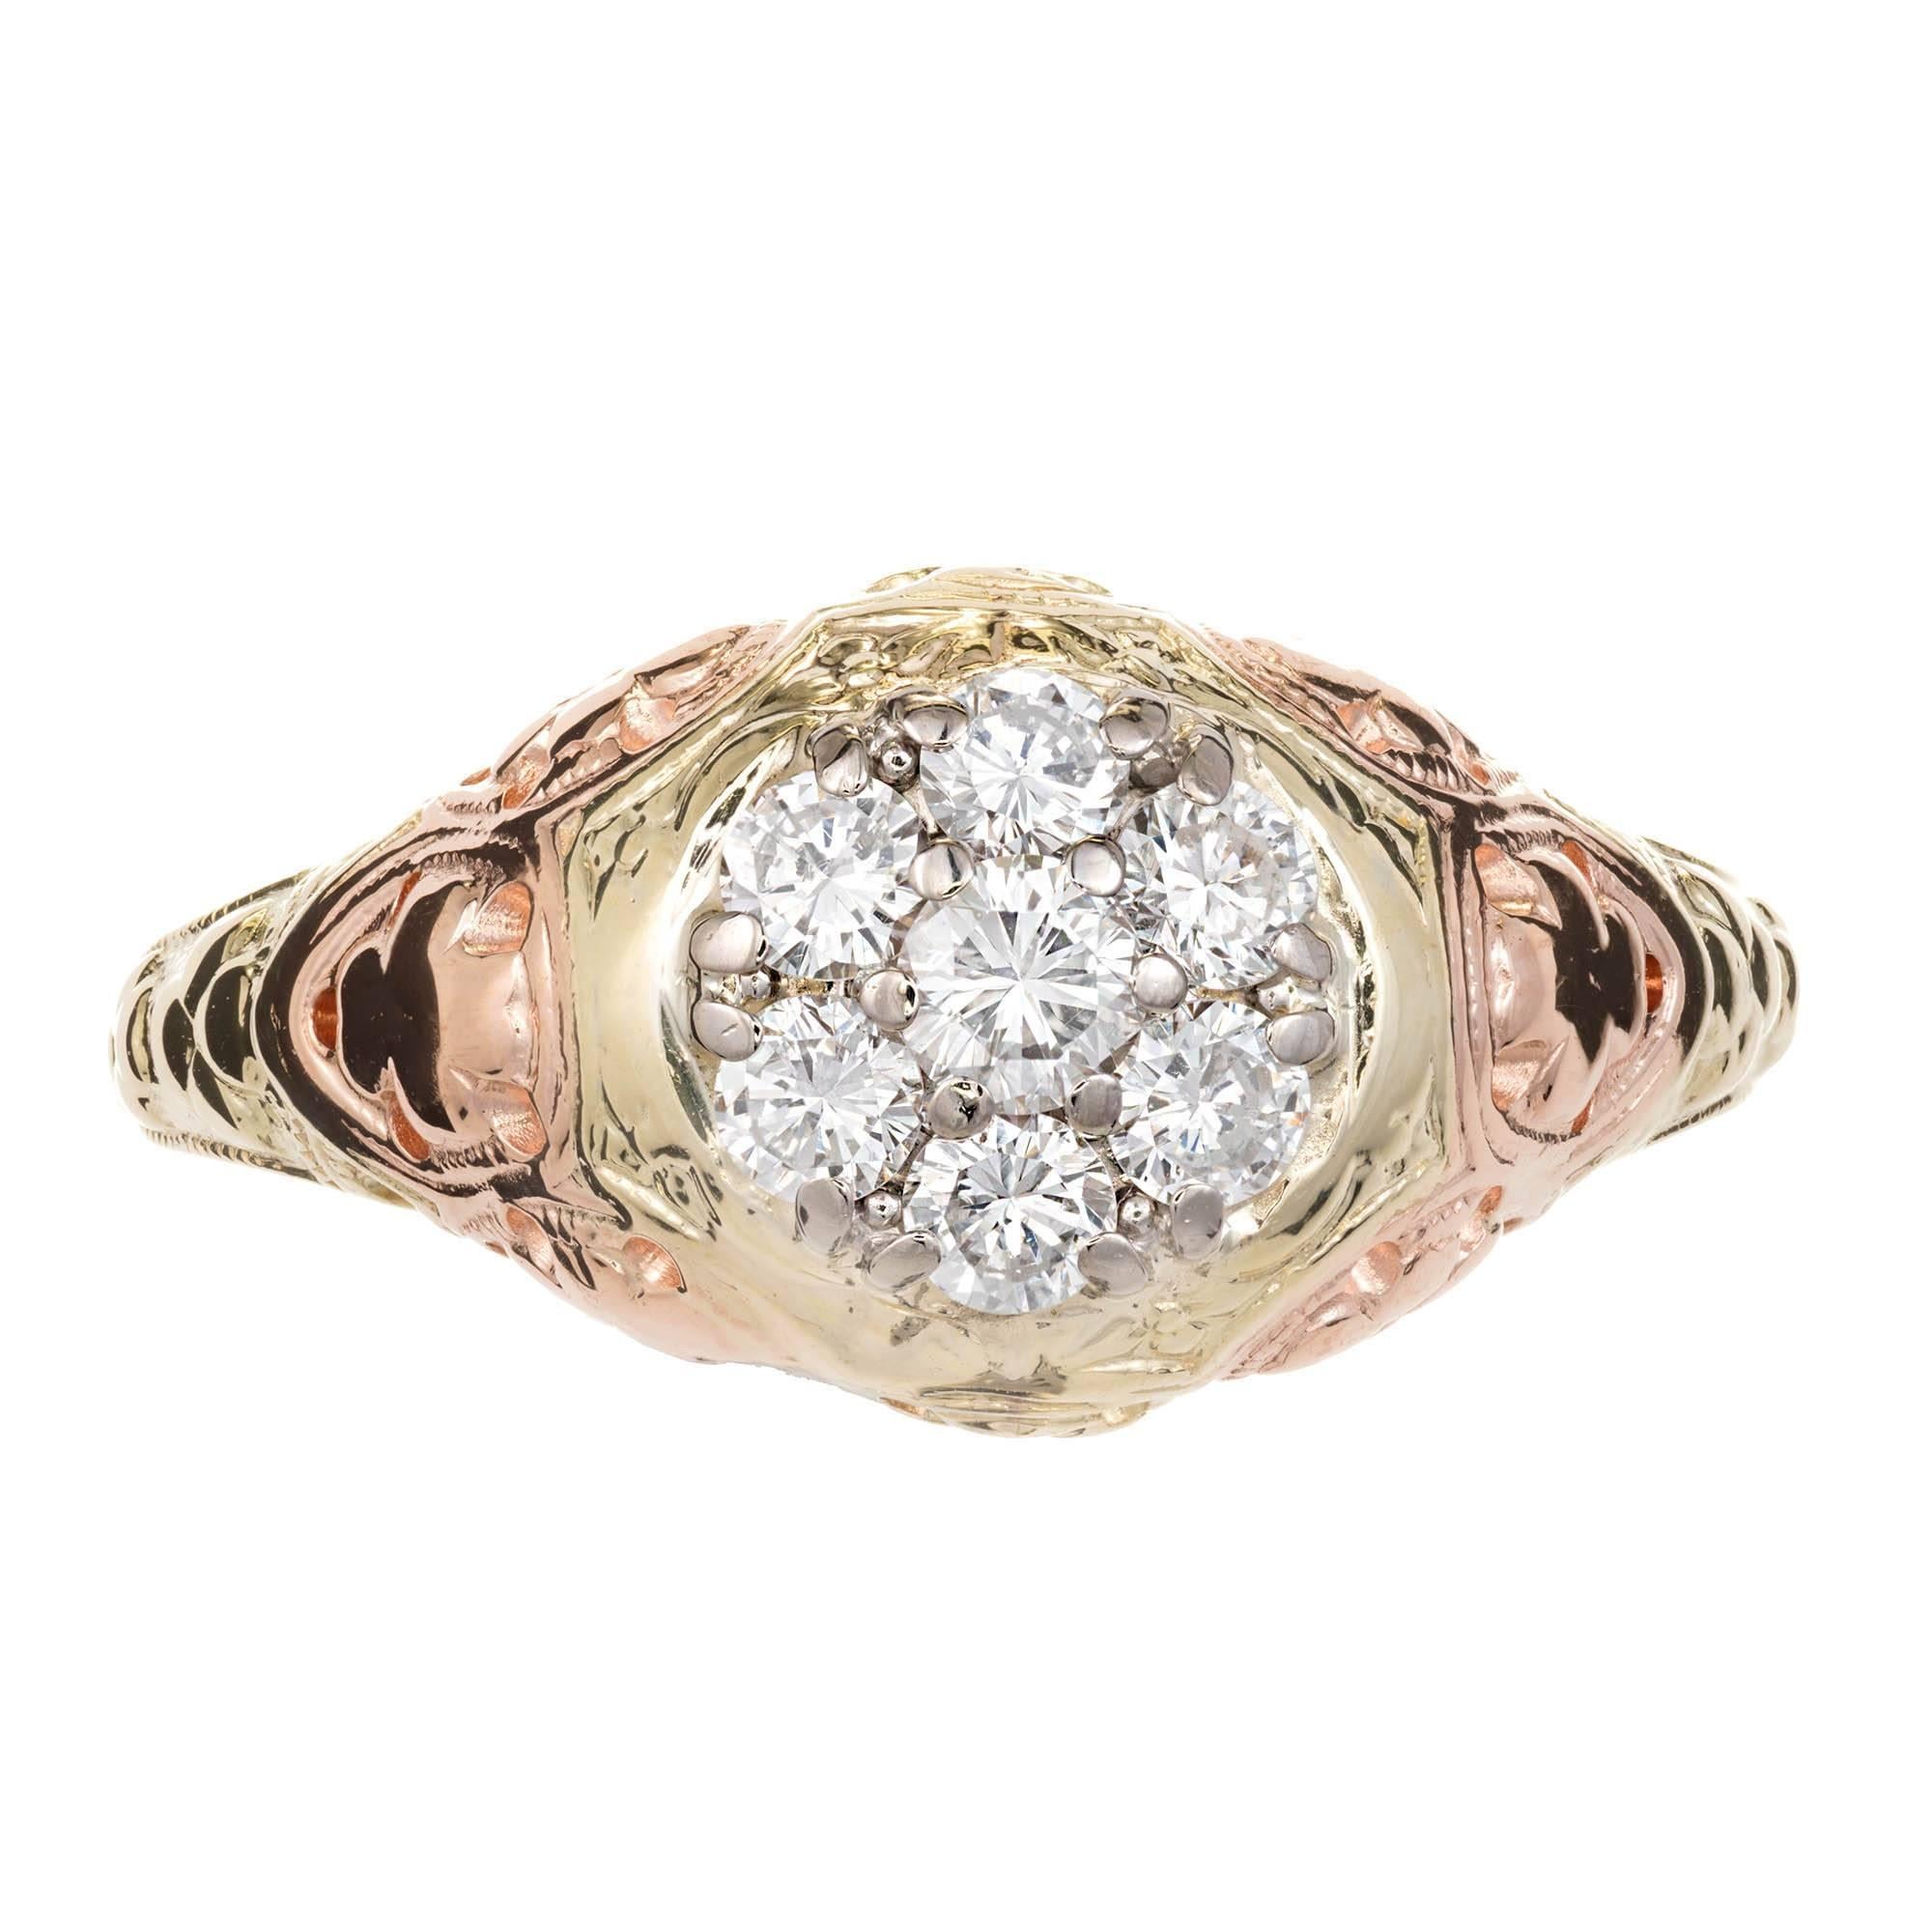   Jabel diamond engagement ring. Hand pierced and beautifully detailed in 14k pink and green gold. White gold top set with well-cut  high grade diamonds.This is an older model with a white gold top,the current model has a yellow gold top.

7 round